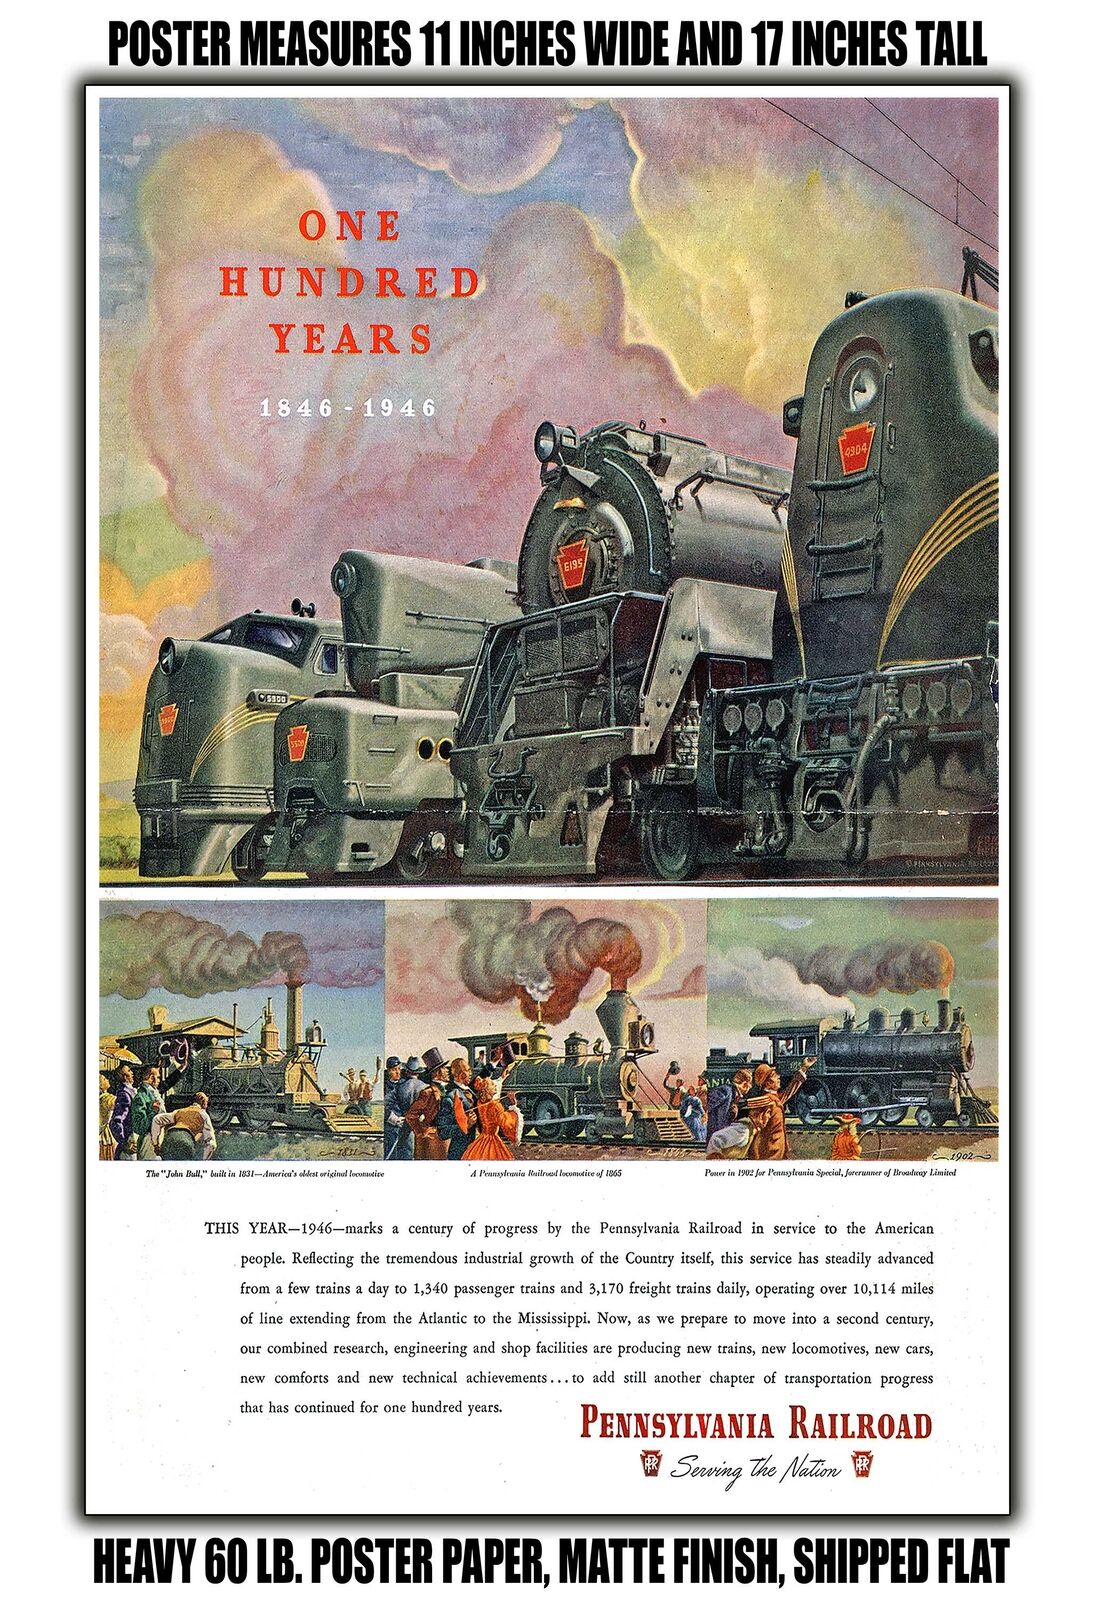 11x17 POSTER - 1946 One Hundred Years 1846 1946 Pennsylvania Railroad